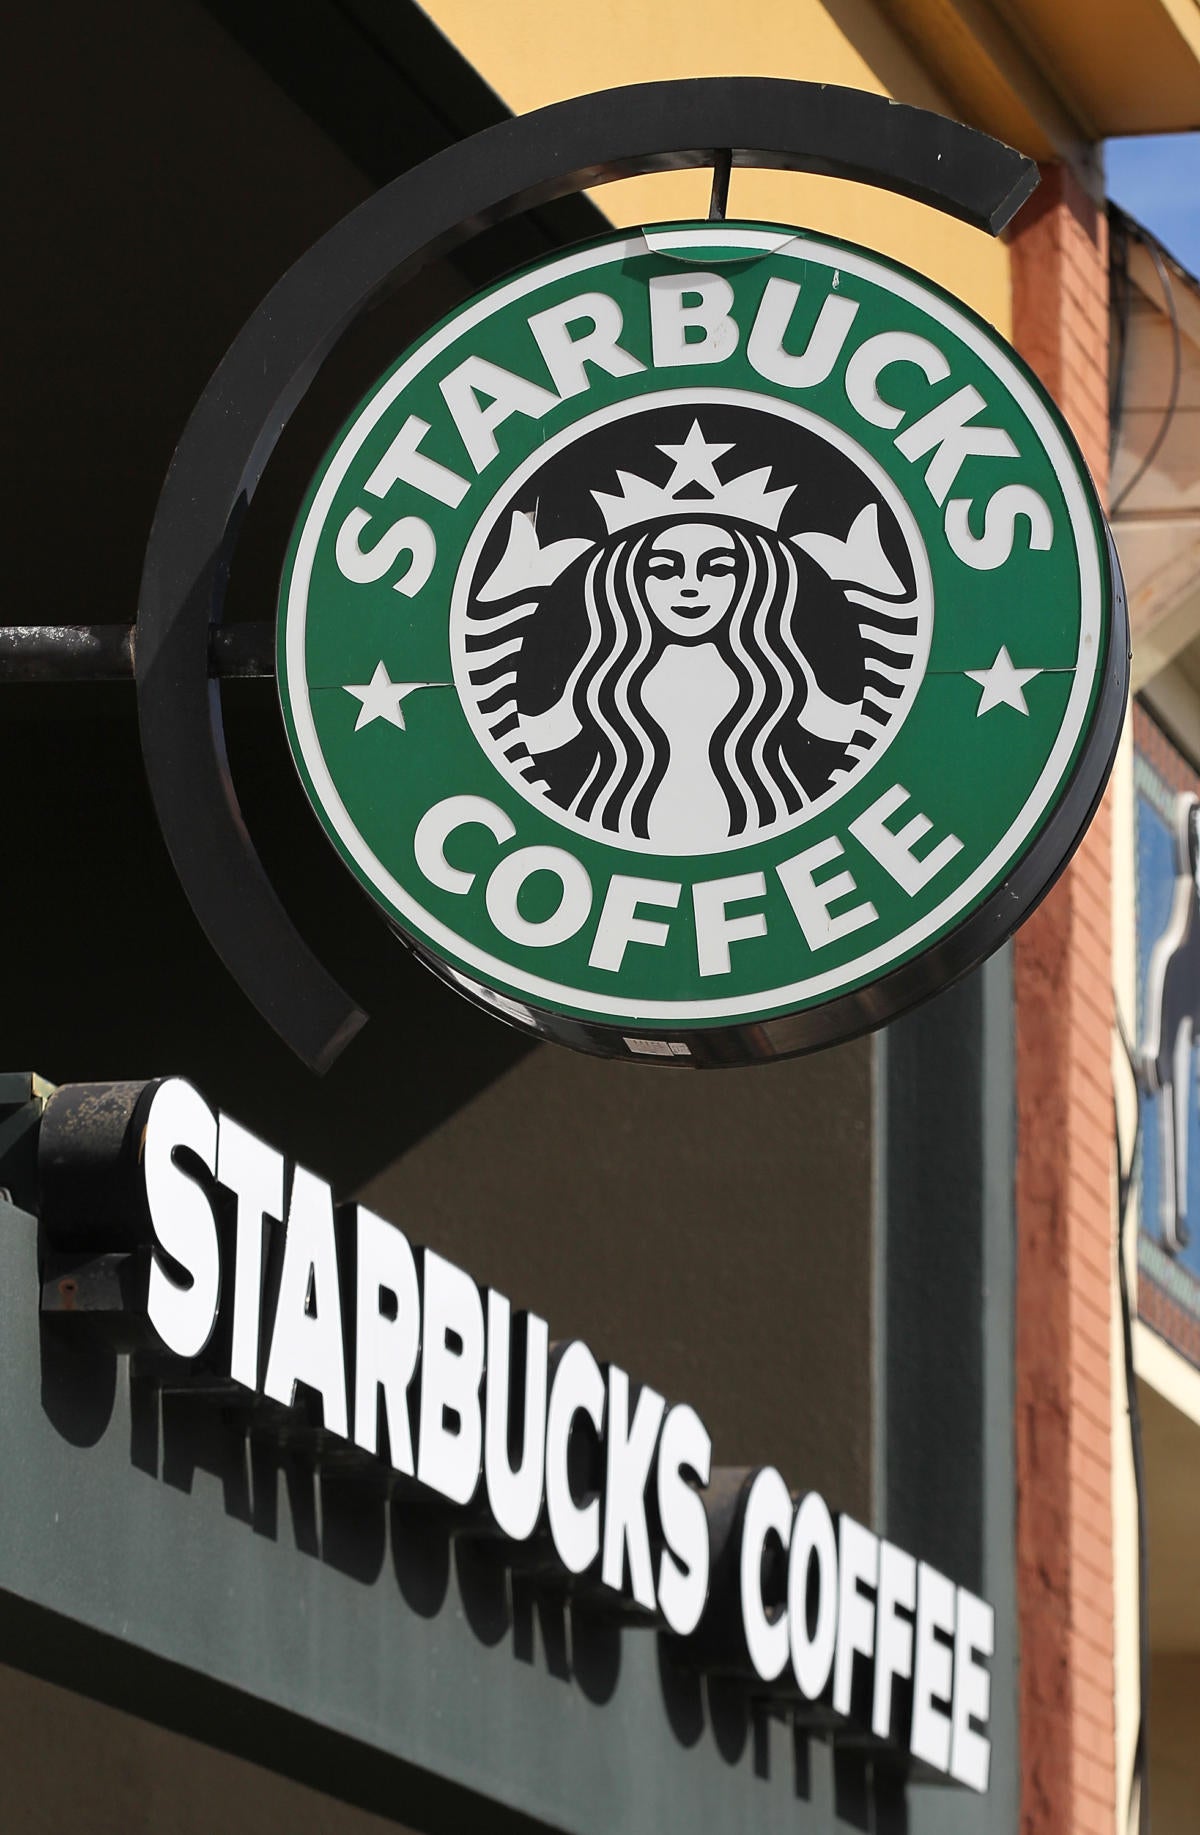 New Cto Role At Starbucks Reflects Rise Of Digital Business Cio